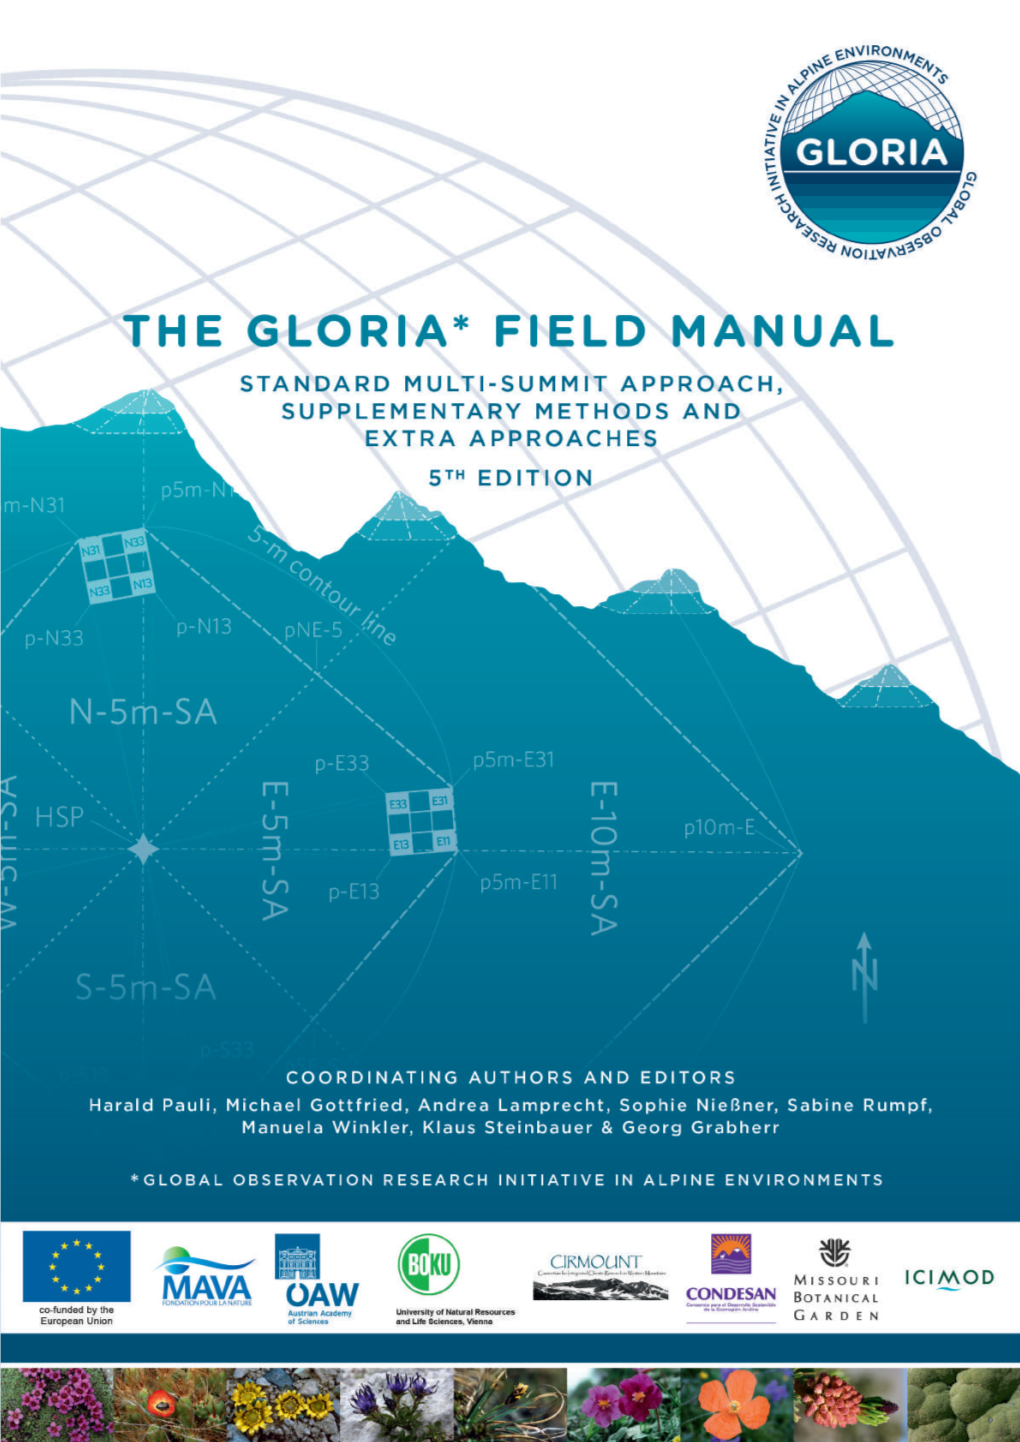 GLORIA-FIELDMANUAL 5Thed 2015 ONLINE Newemail.Compressed.Pdf